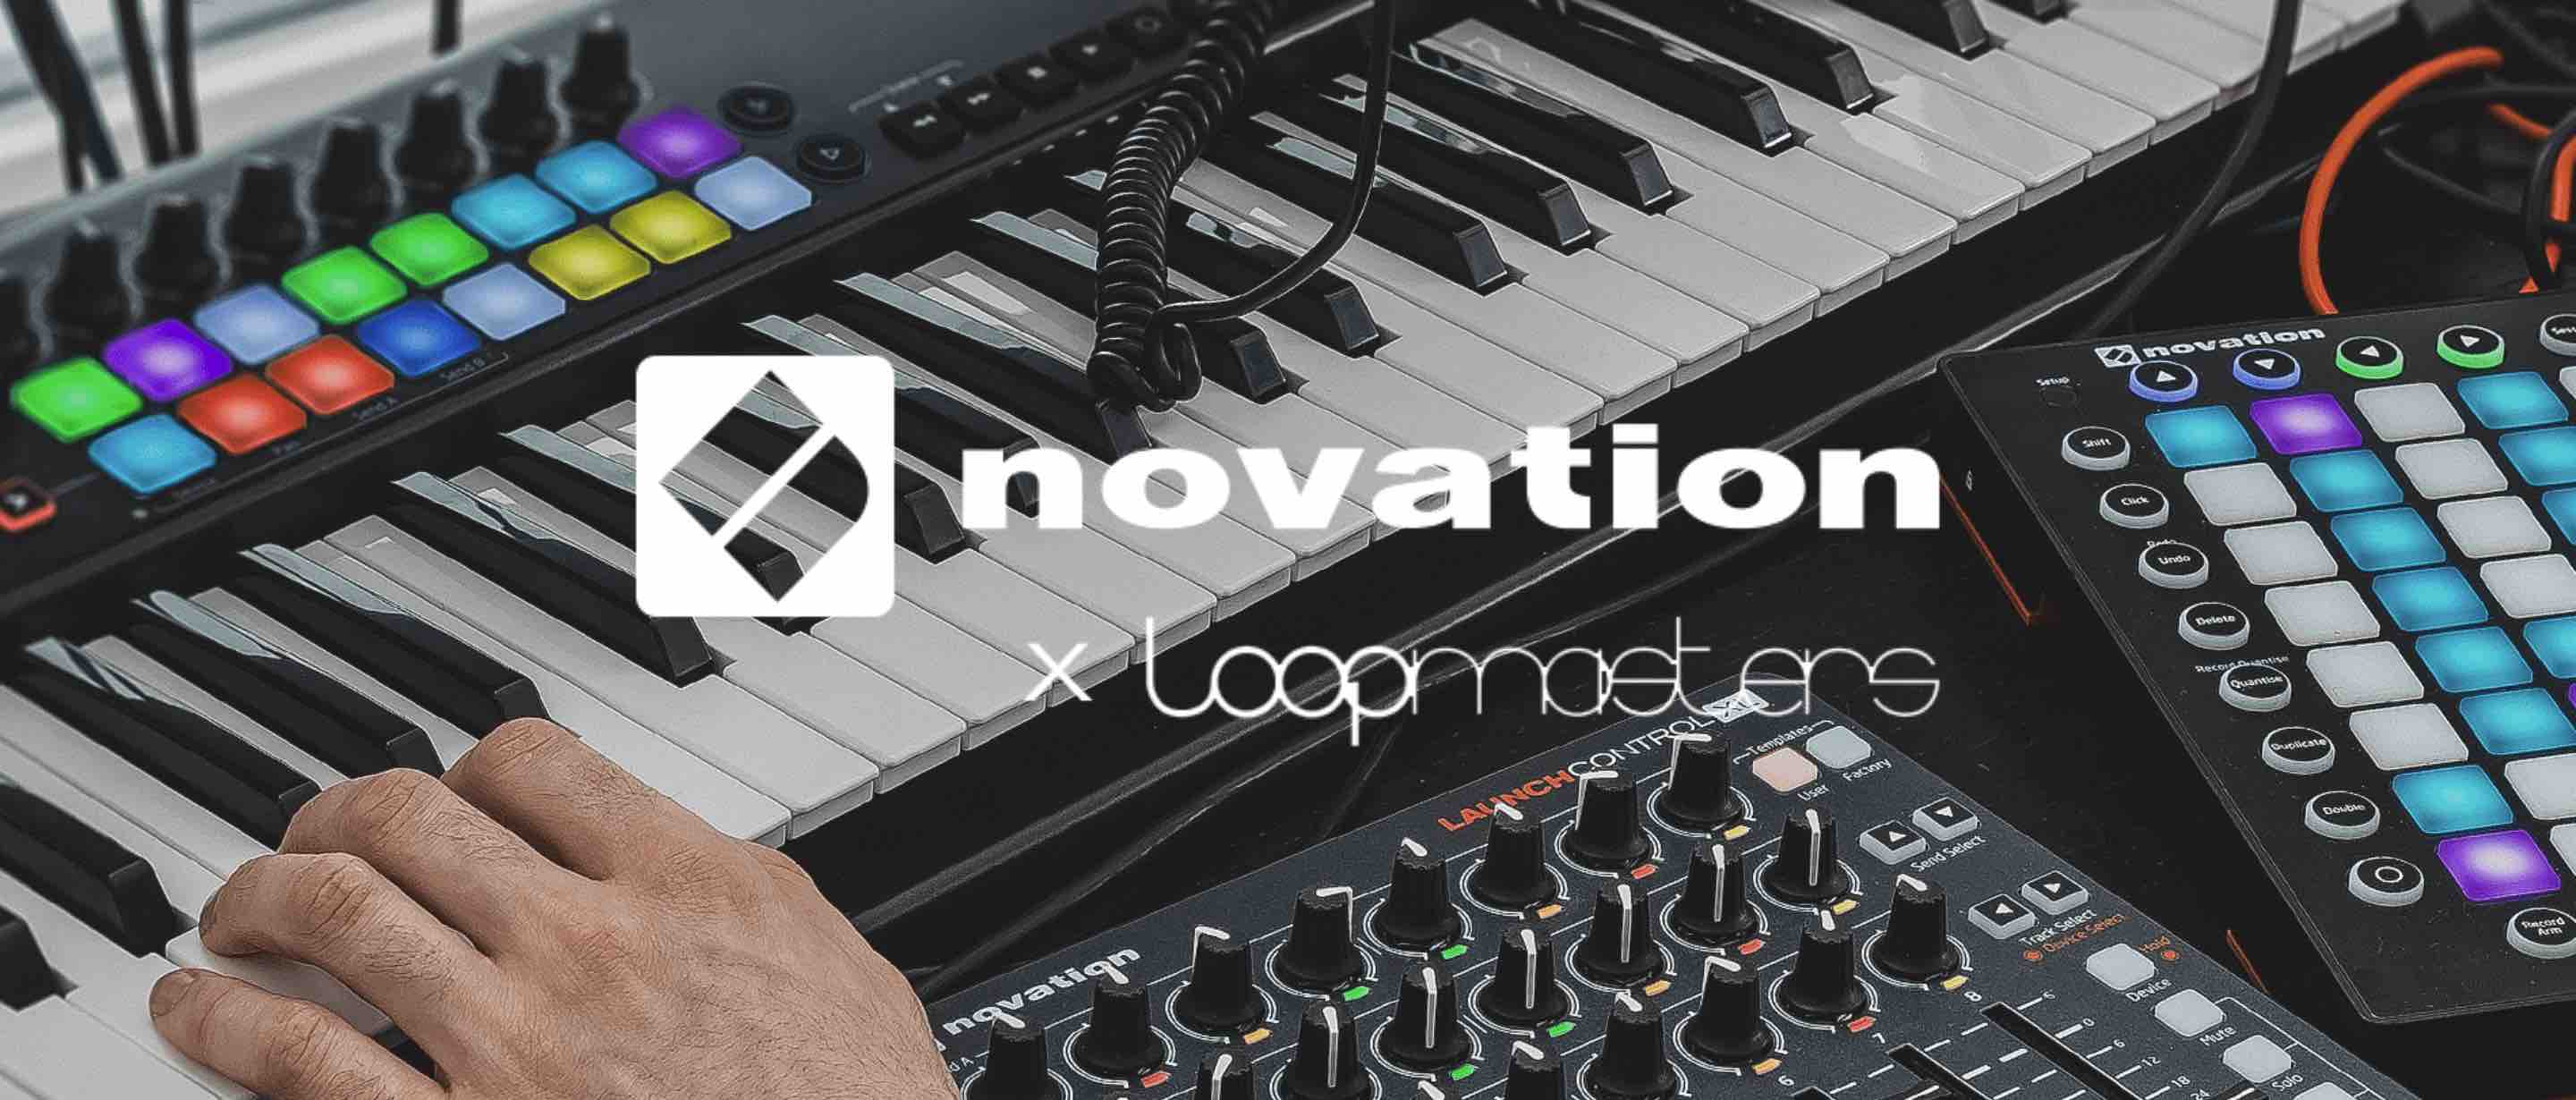 Loopmasters_x_Novation.png